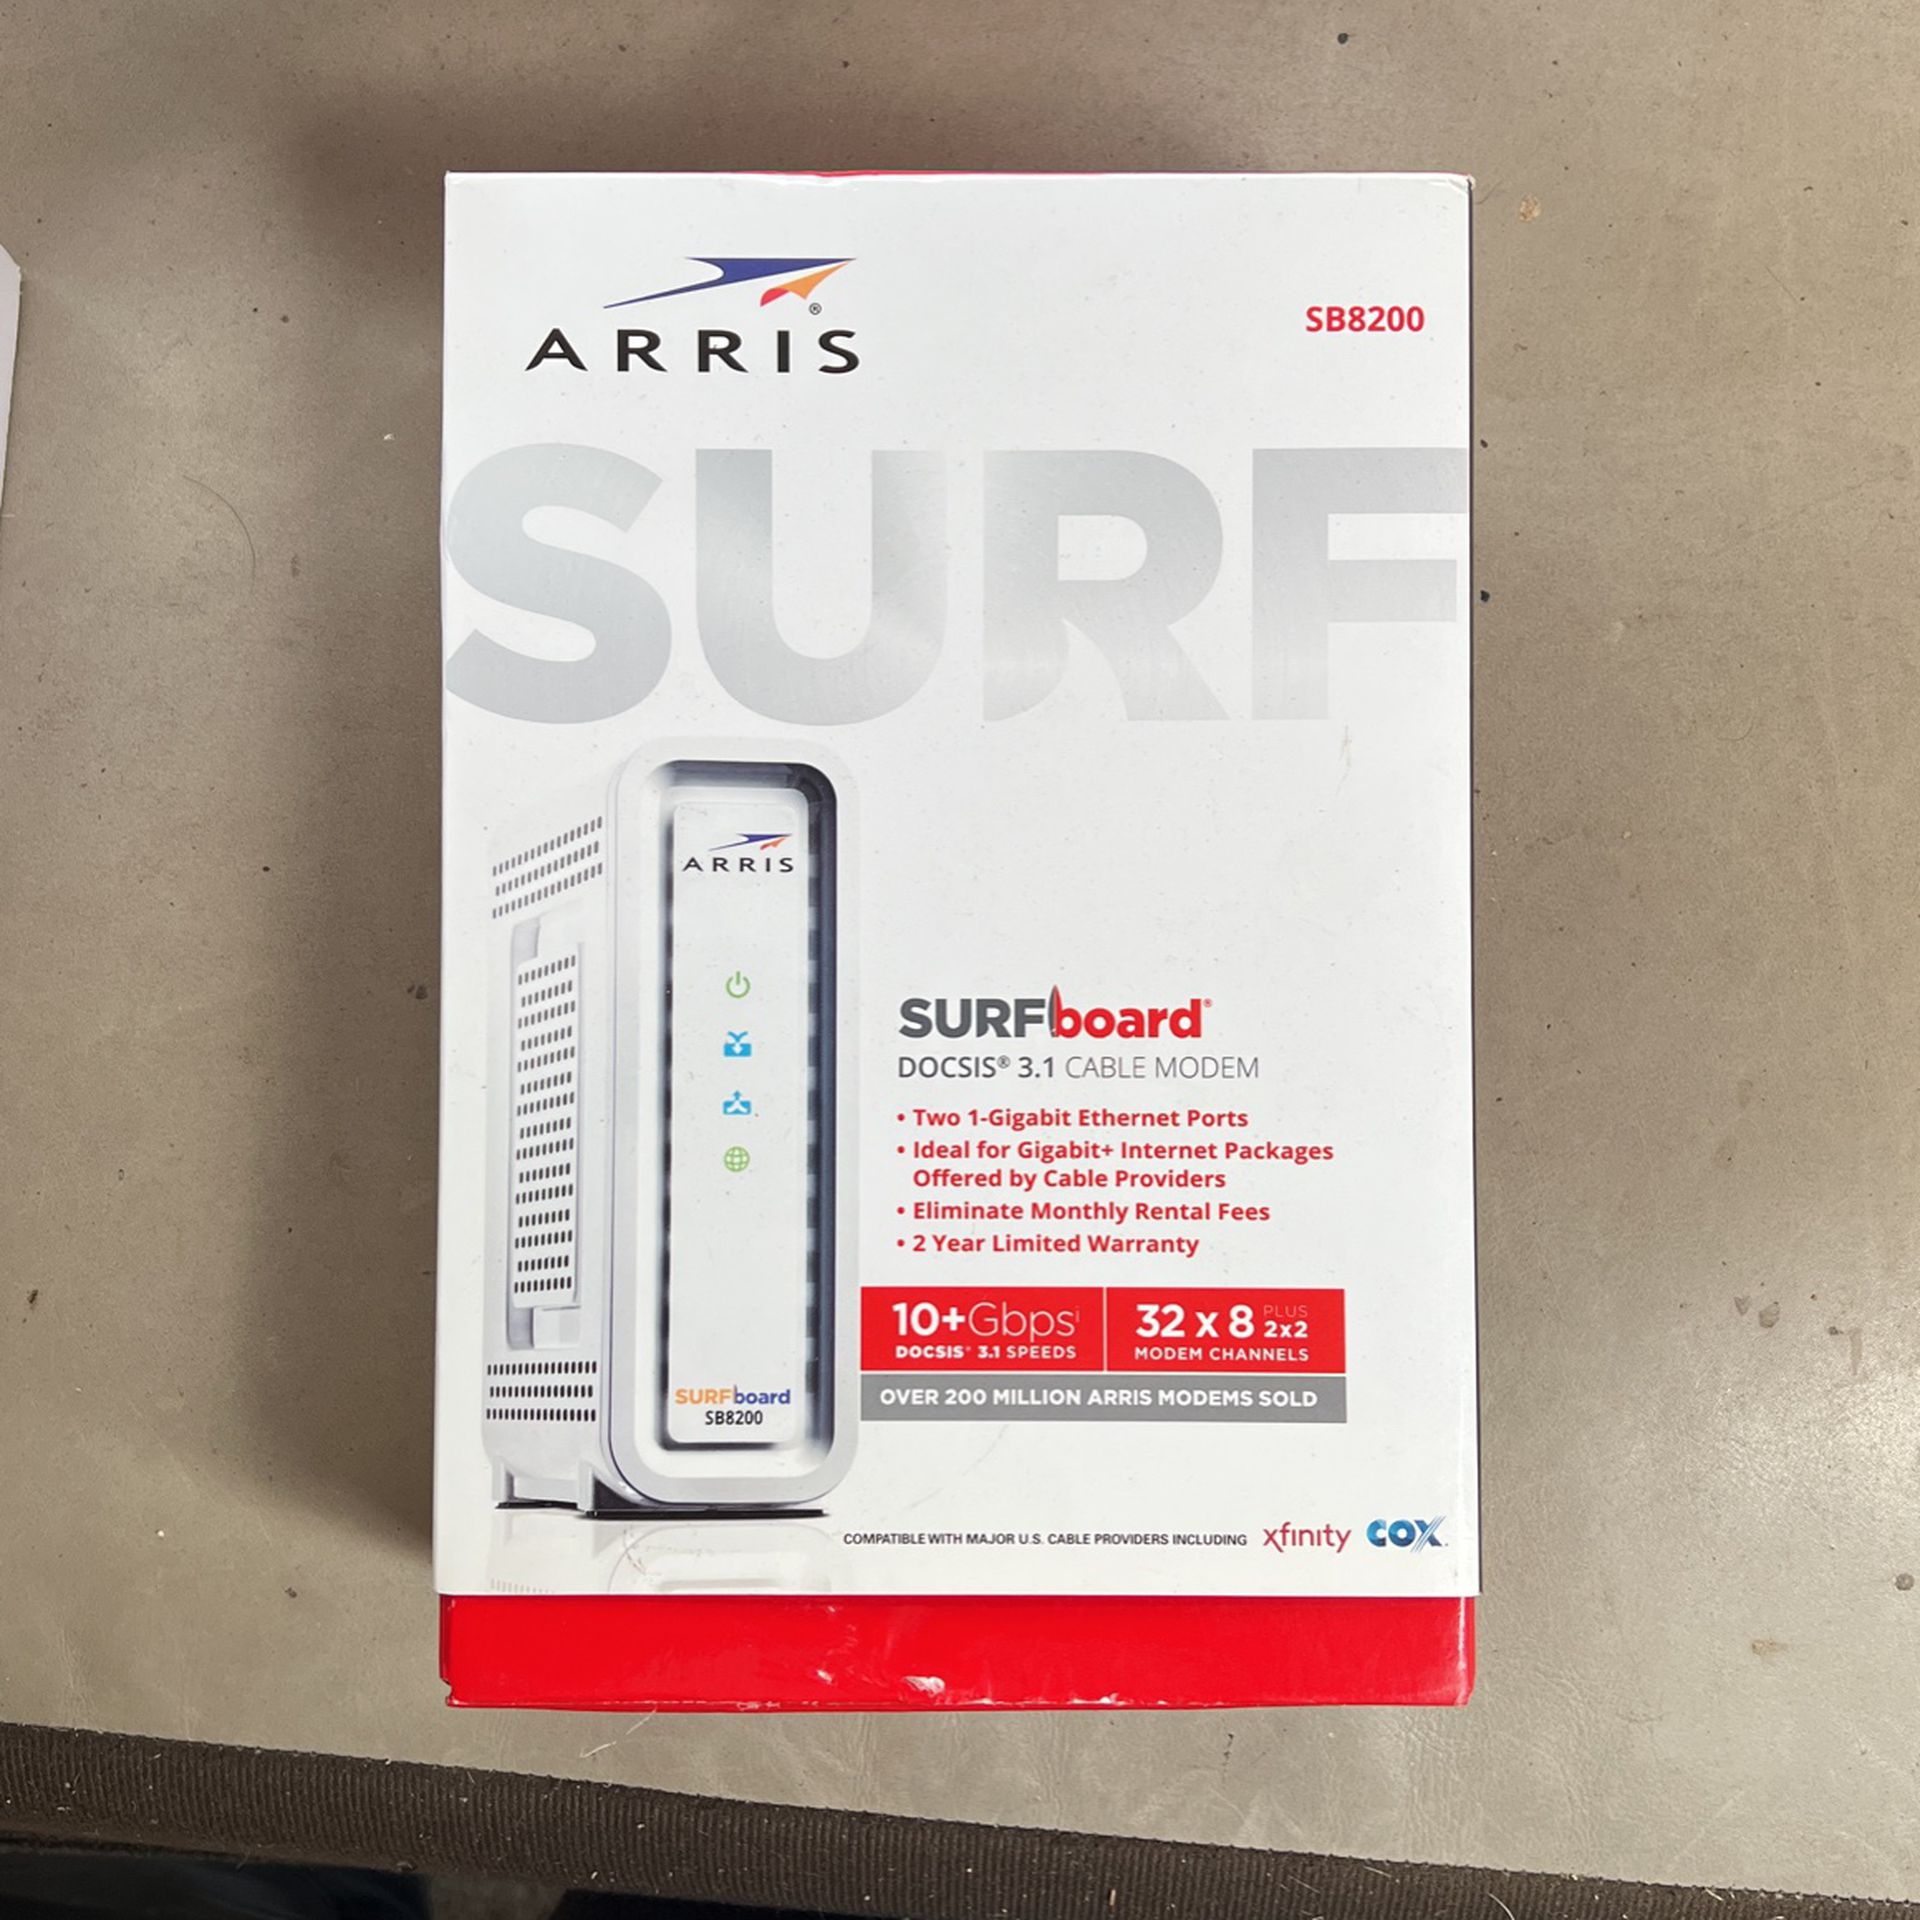 ARRIS SURFboard Gigabit DOCSIS 3.1 Cable Modem, 10 Gbps Max Speed, Approved for Comcast Xfinity, Cox and Charter. 